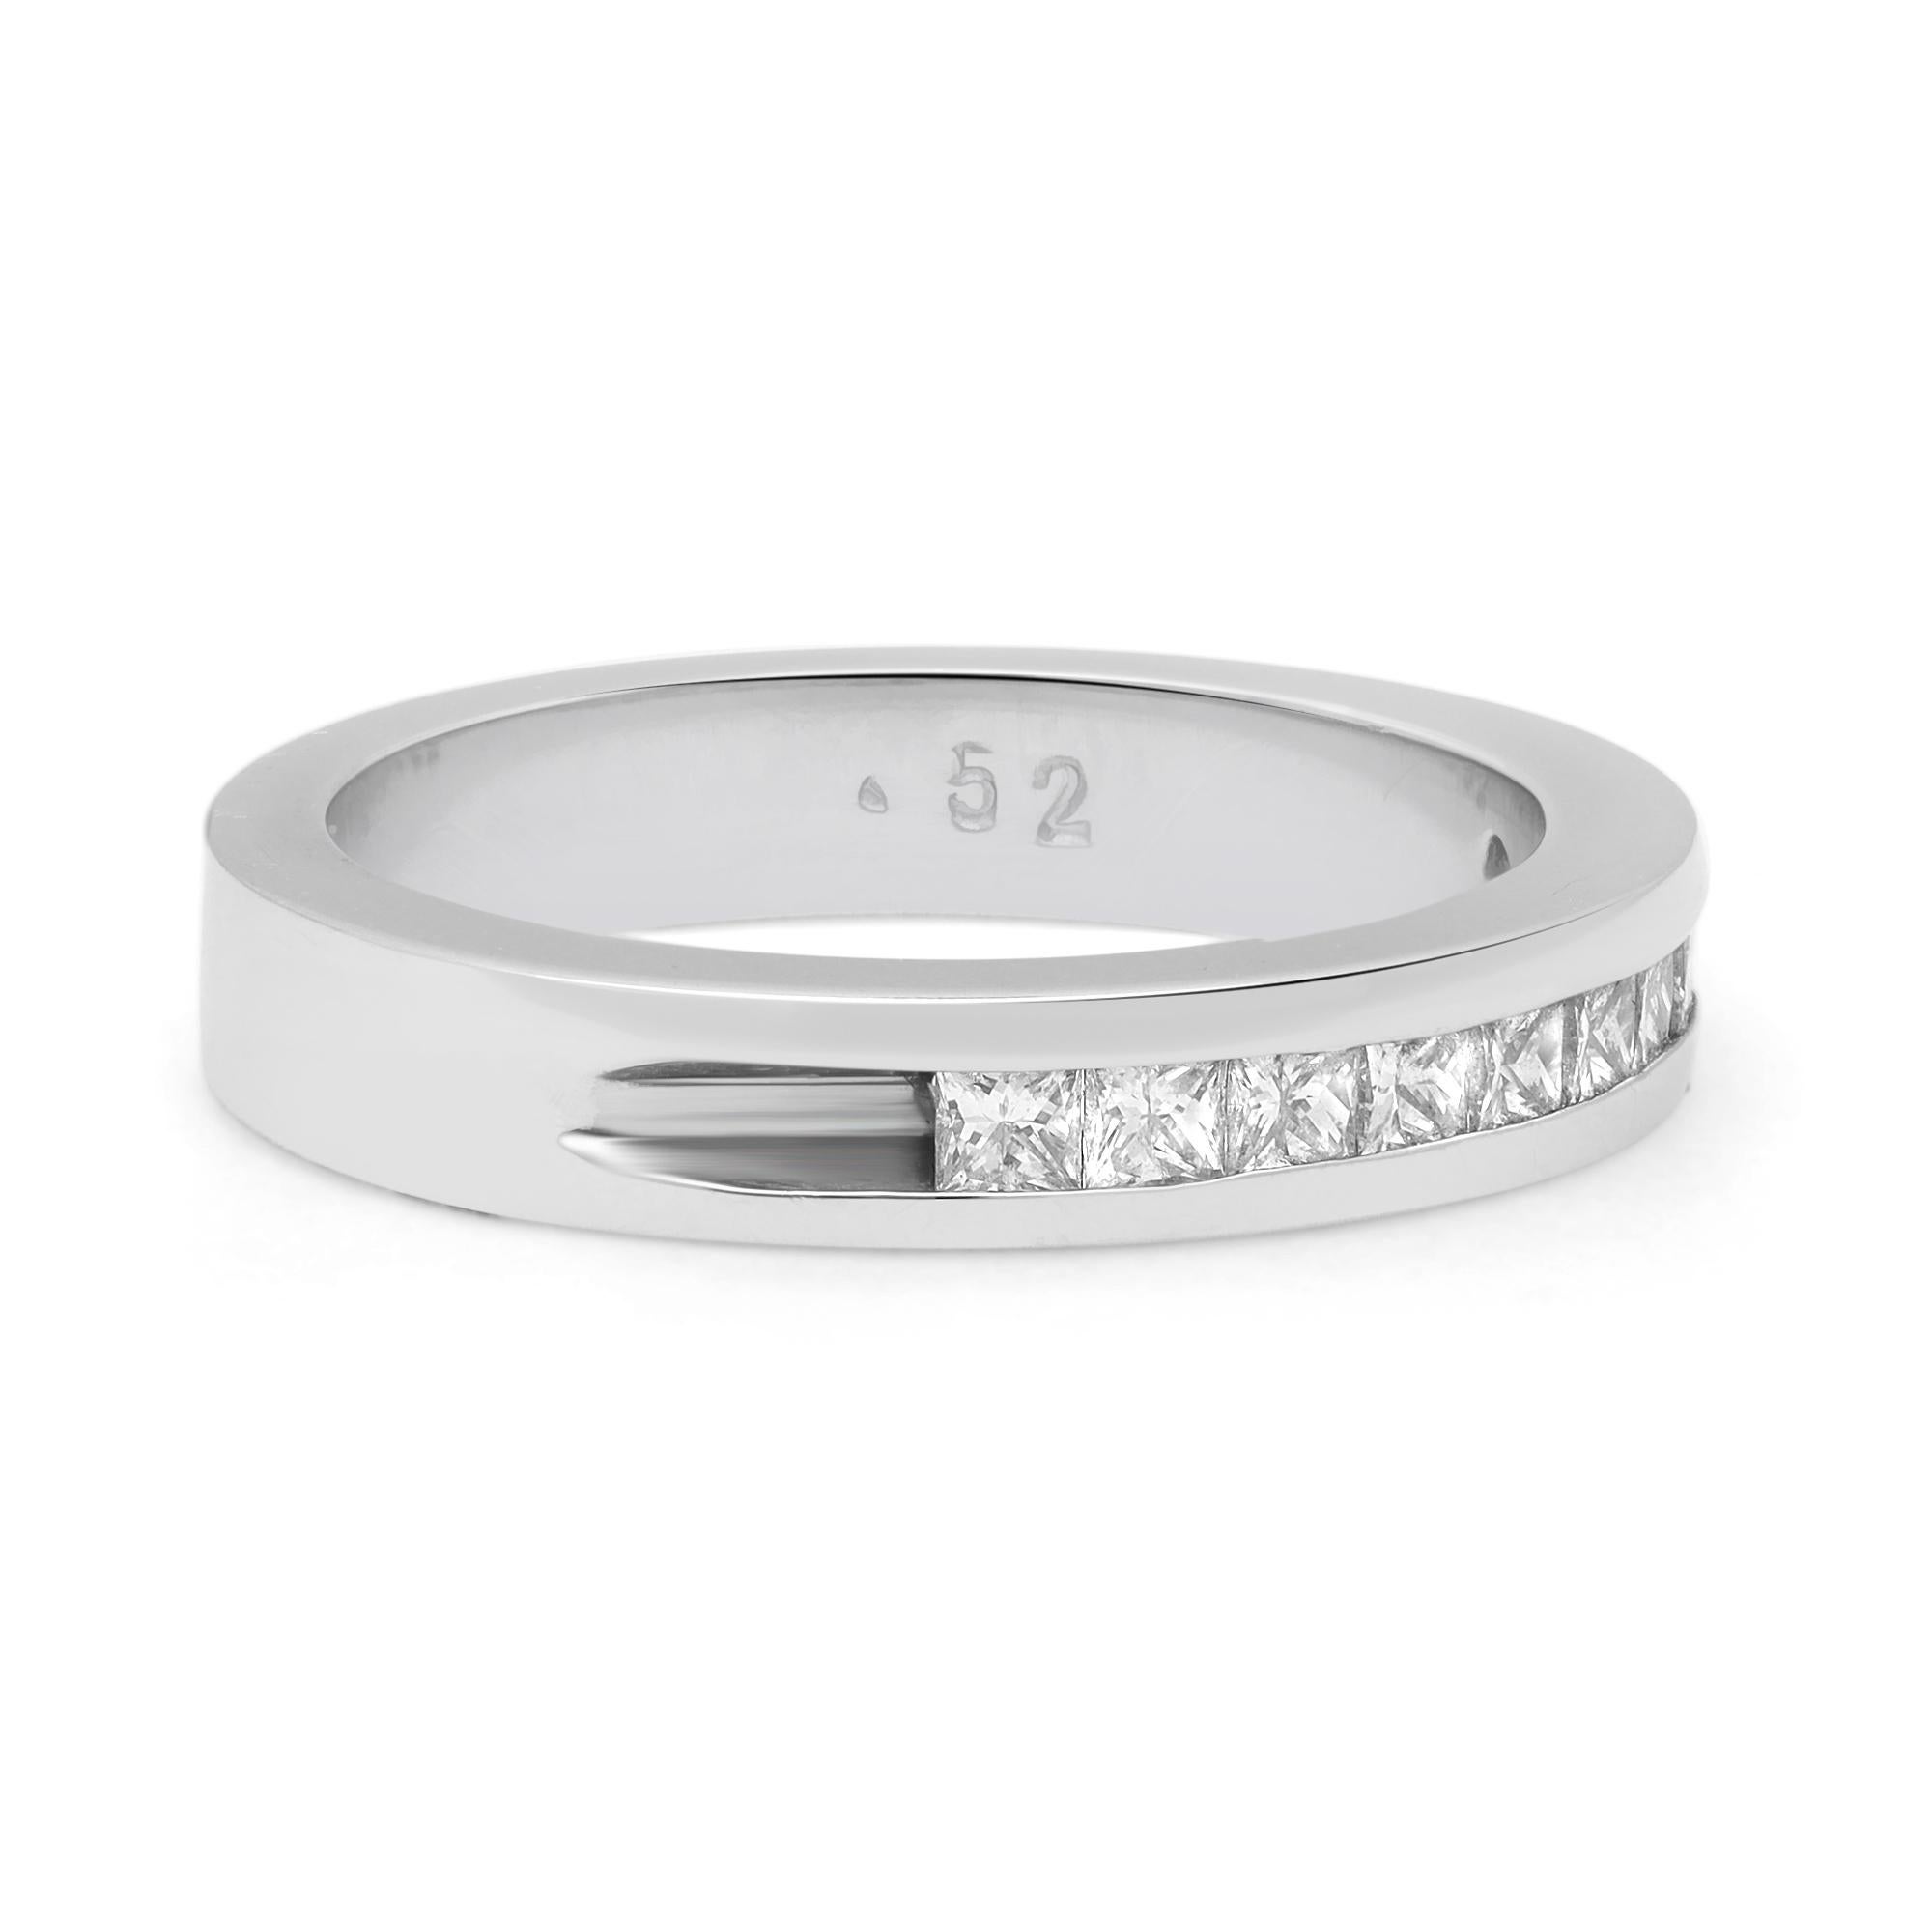 Timeless and stylish diamond wedding band ring. Crafted in fine high polished platinum. This ring features 10 dazzling princess cut diamonds in channel setting. Perfect for a gift or as a promise ring. Total diamond weight: 0.50 carat. Diamond color